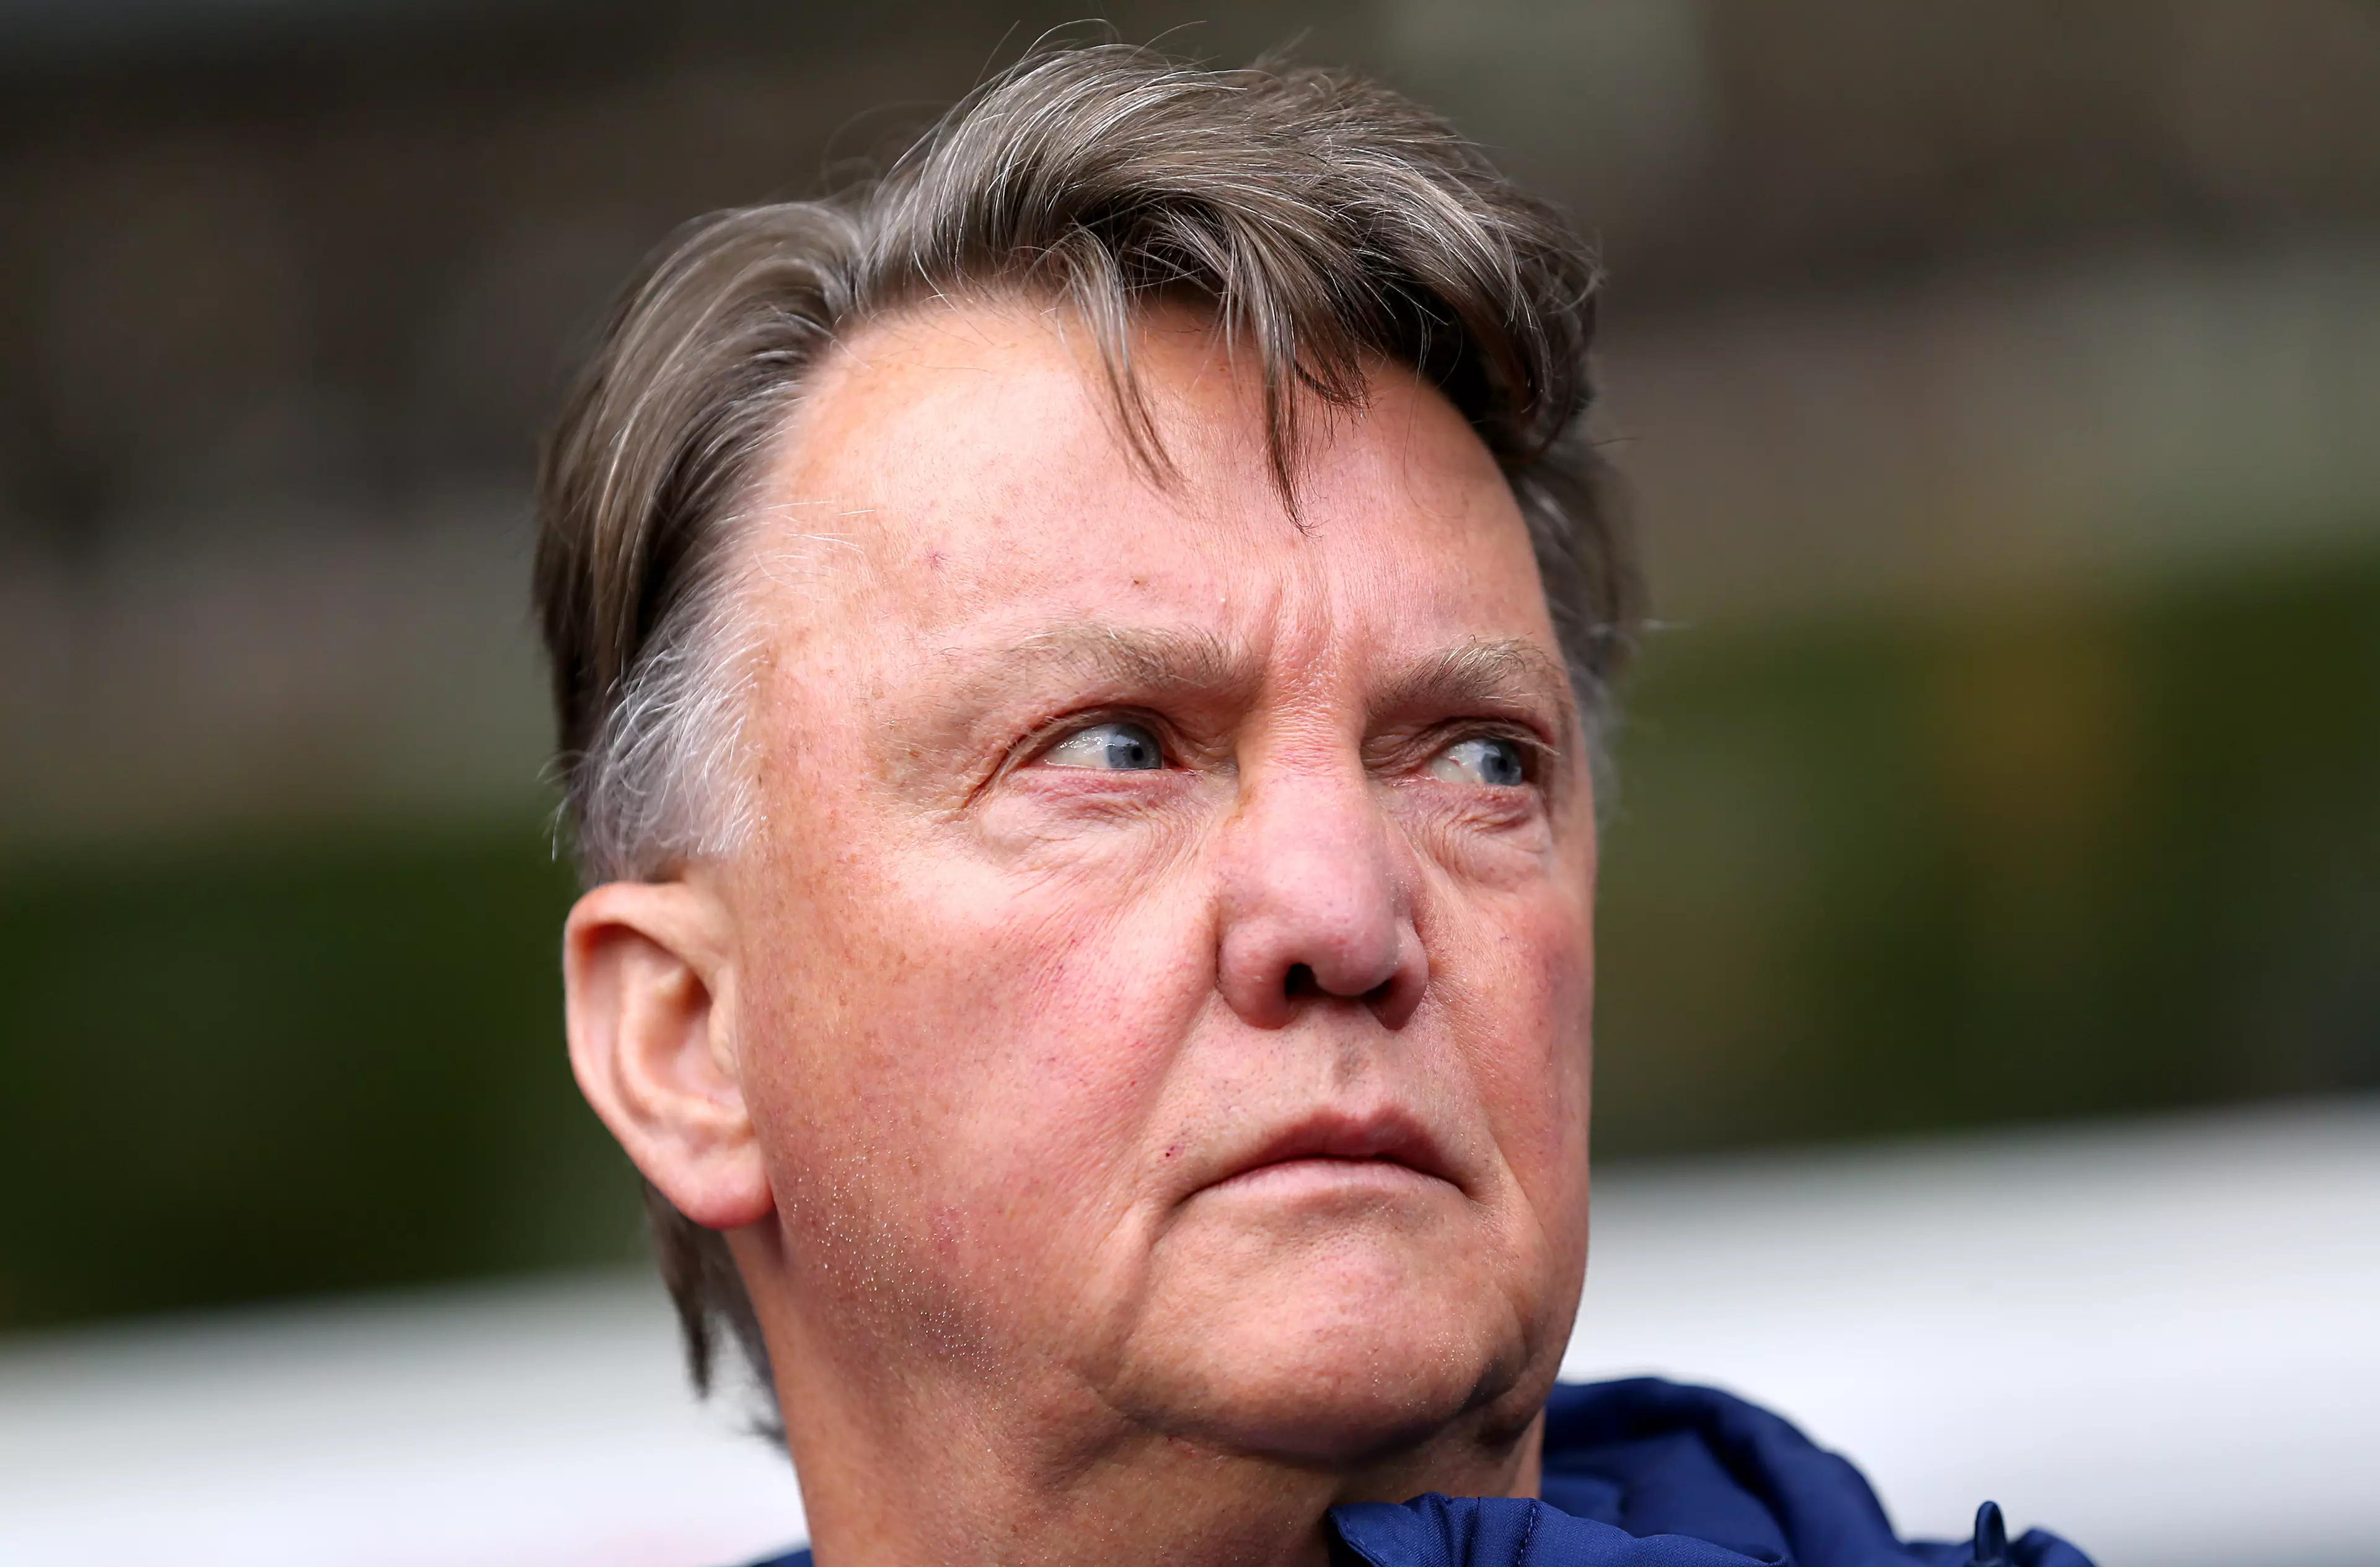 Details Of Louis Van Gaal's Manchester United Contract Have Been Revealed